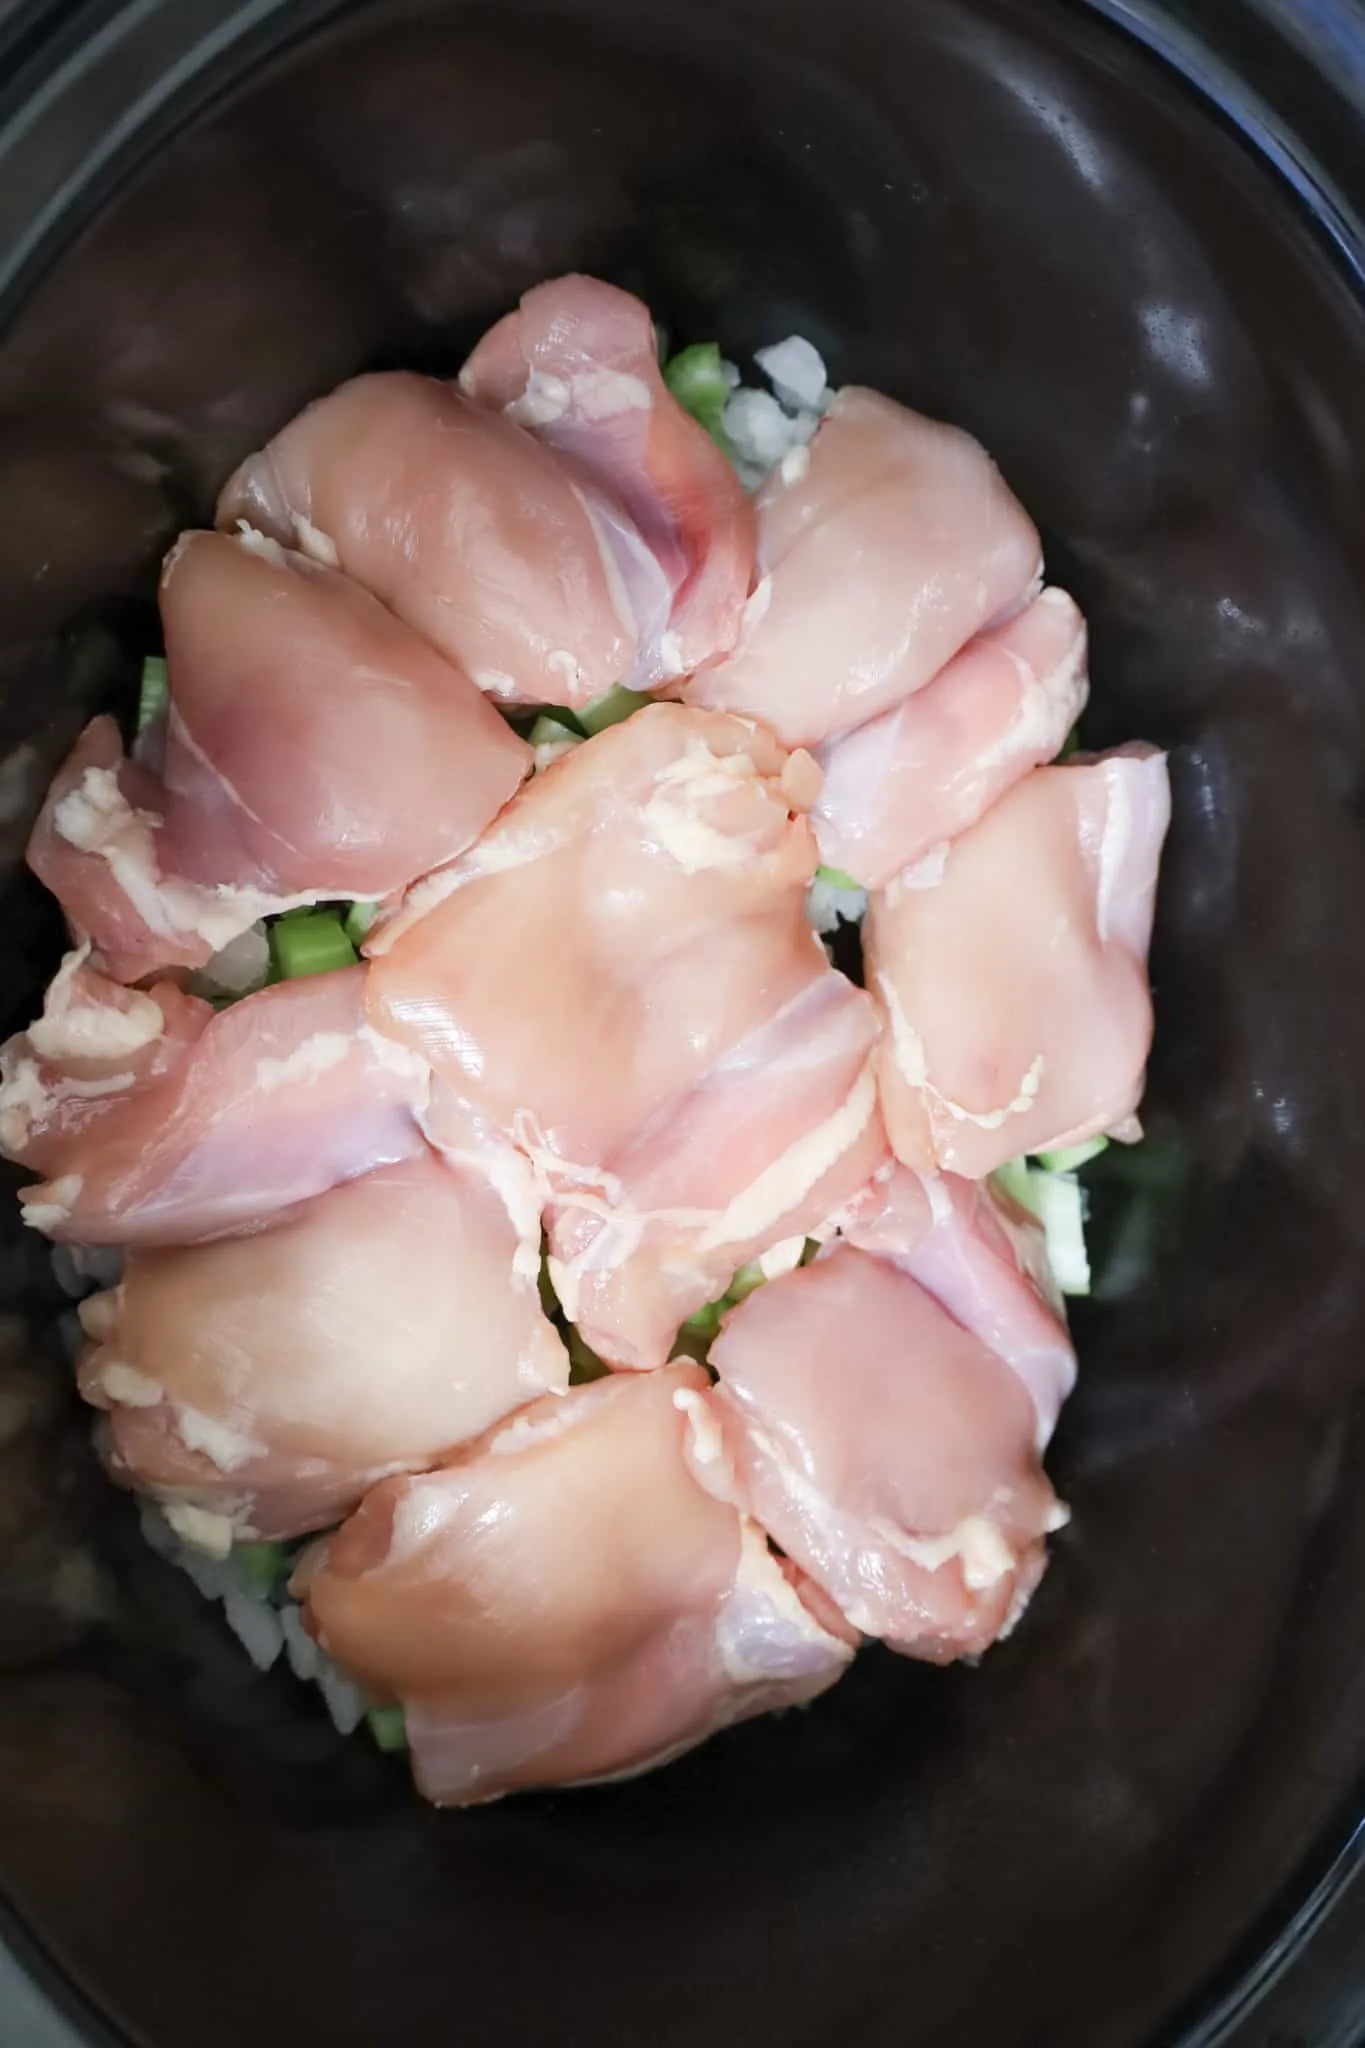 boneless, skinless chicken thighs on top of diced onions and celery in a crock pot